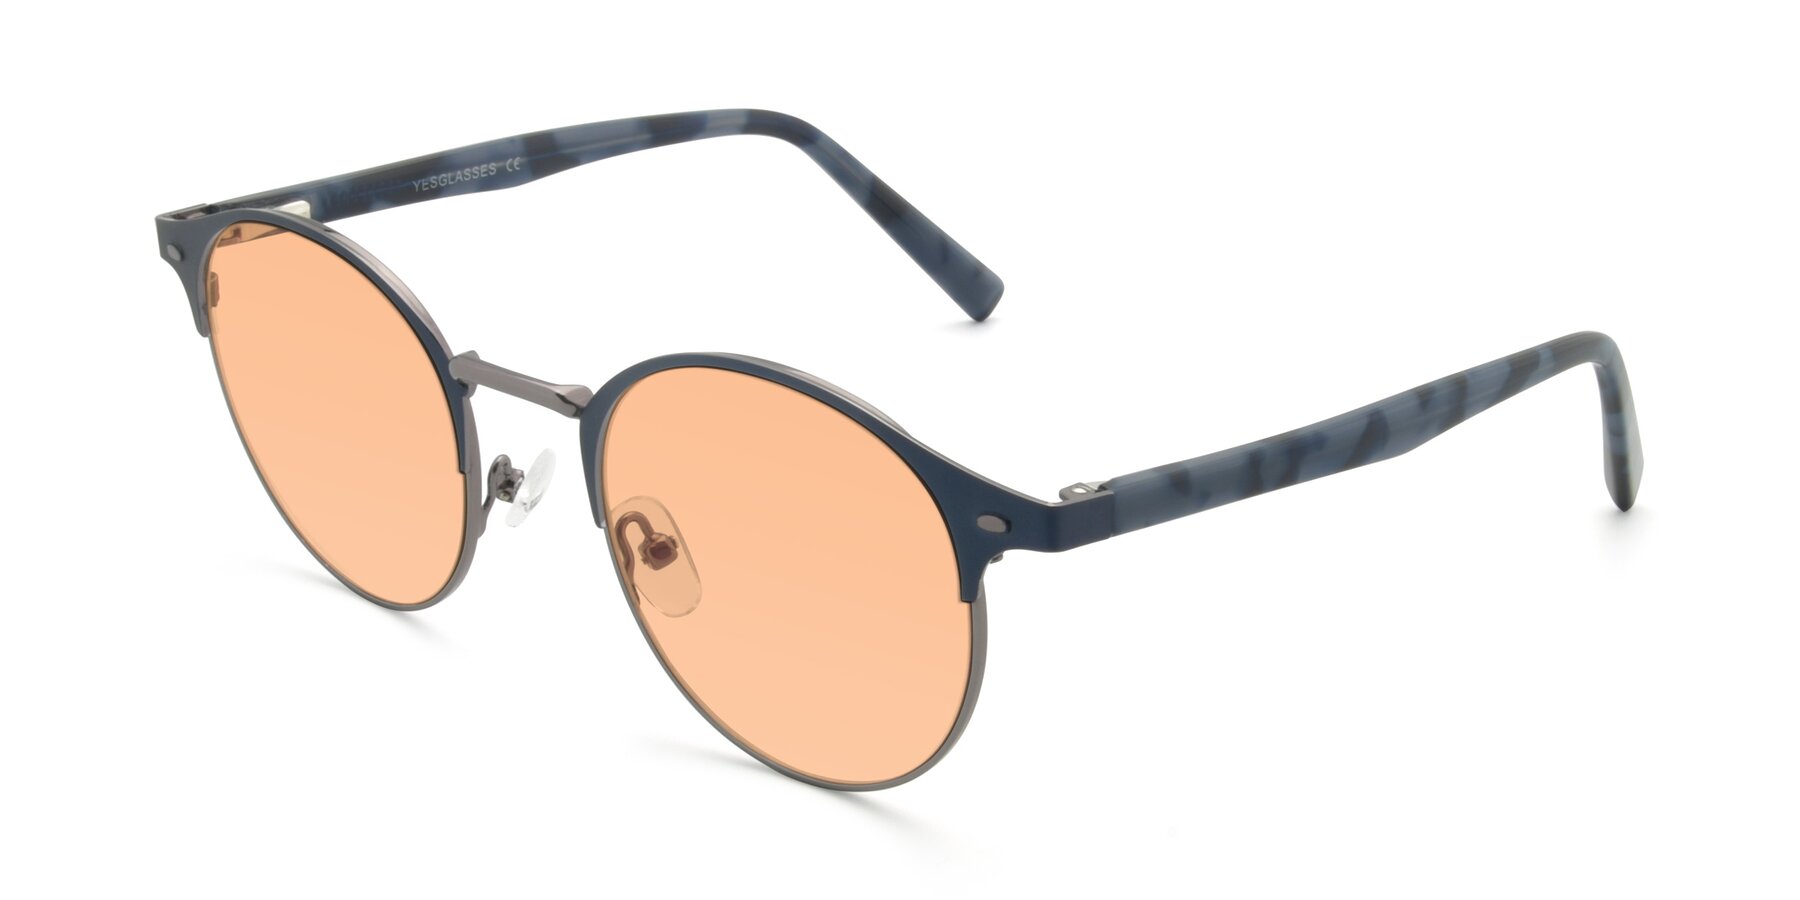 Angle of 9099 in Blue-Gunmetal with Light Orange Tinted Lenses